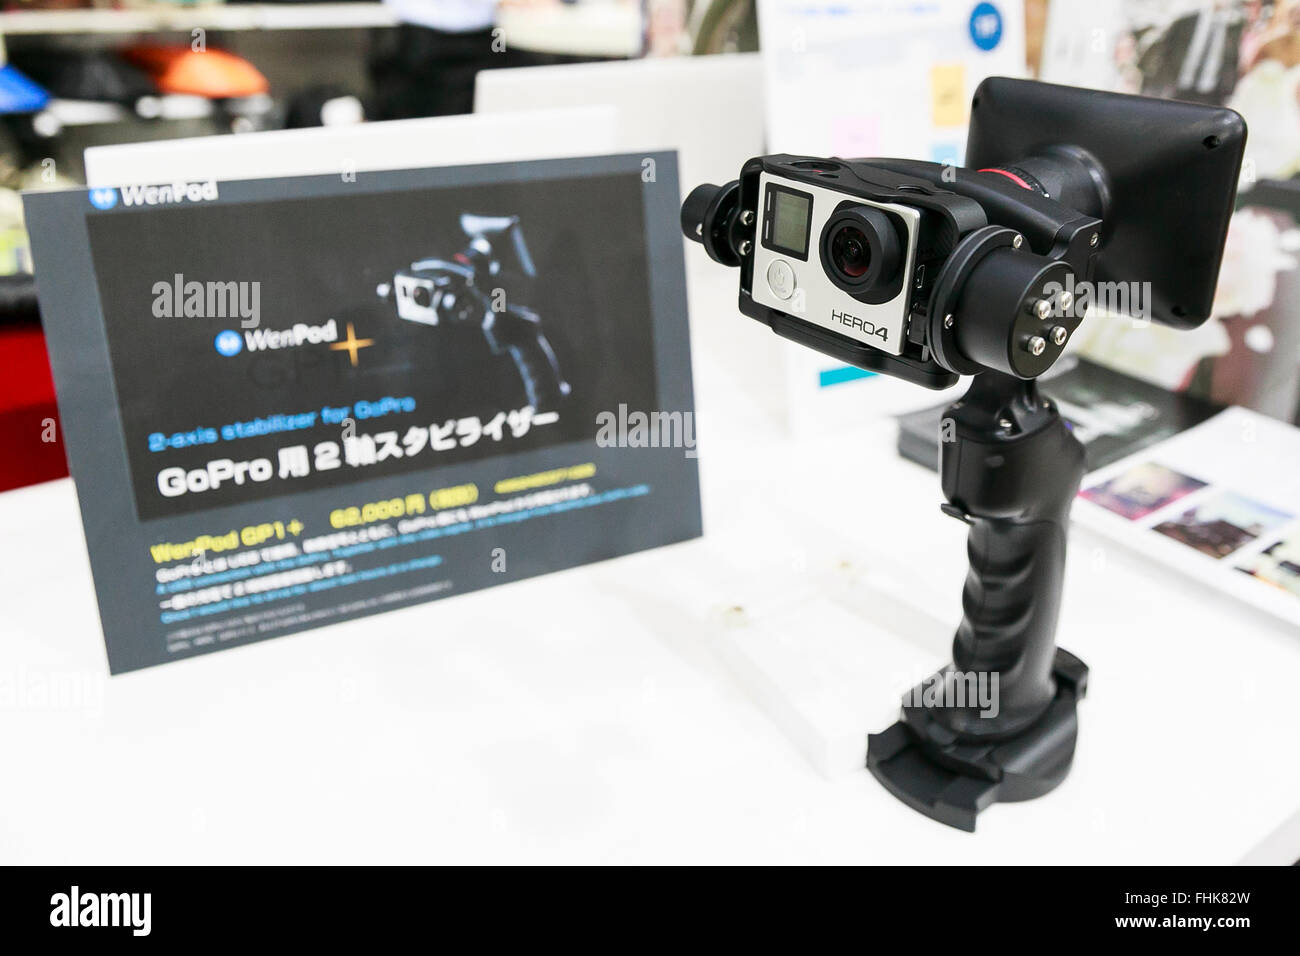 A Wenpod GP-1 2Axis Handheld Gimbal Steadicam Stabilizer Photo for GoPro  Hero 4 on display at the CP 2016 Camera & Imaging Show on February 25,  2016, in Yokohama, Japan. CP is